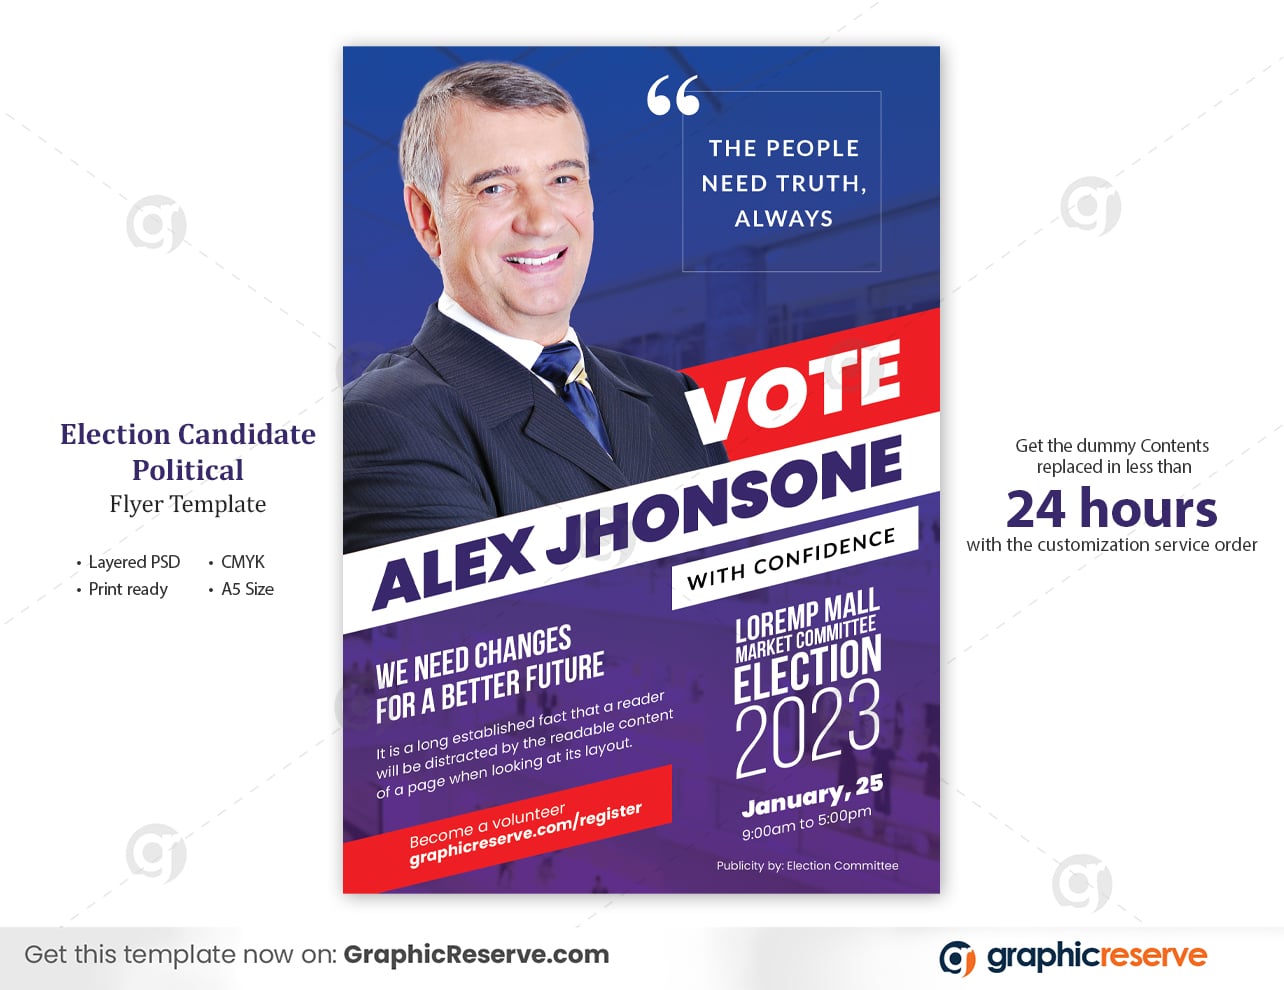 Election Candidate Political Flyer Graphic Reserve